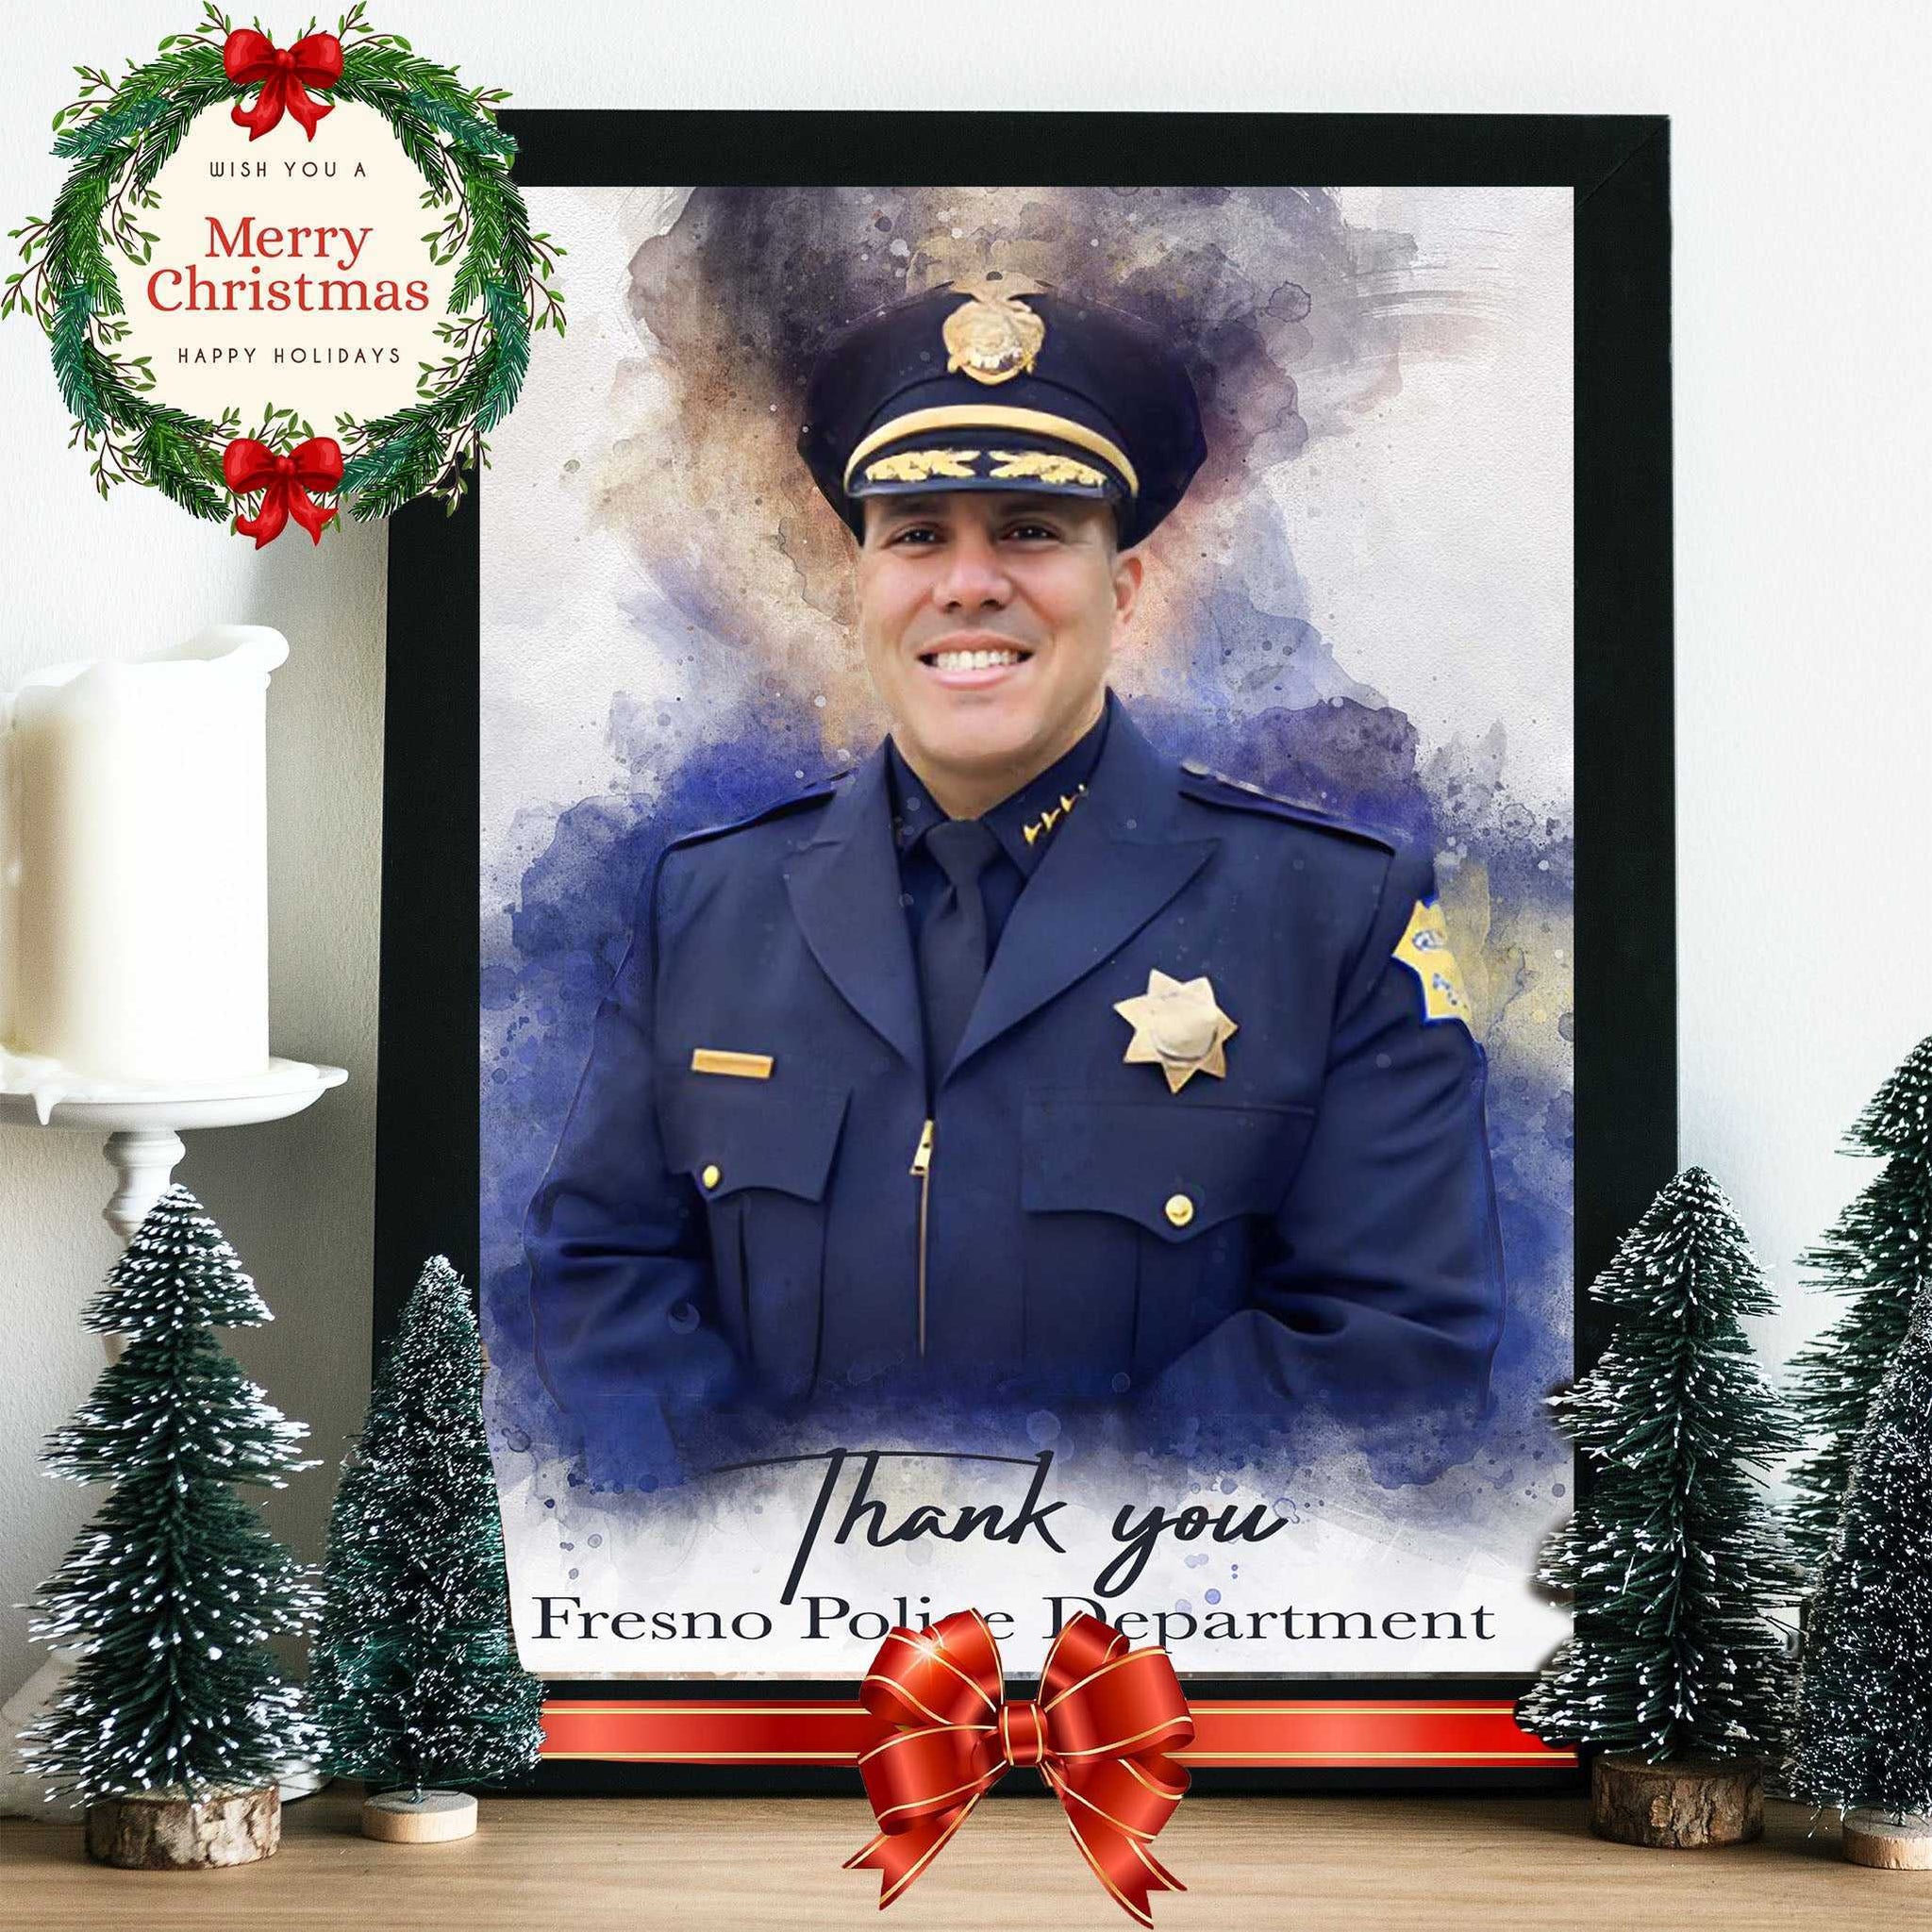 Law Enforcement Appreciation Day | Gifts for Police Officers | Thank a Police Officer Day | Police Week Gift - FromPicToArt